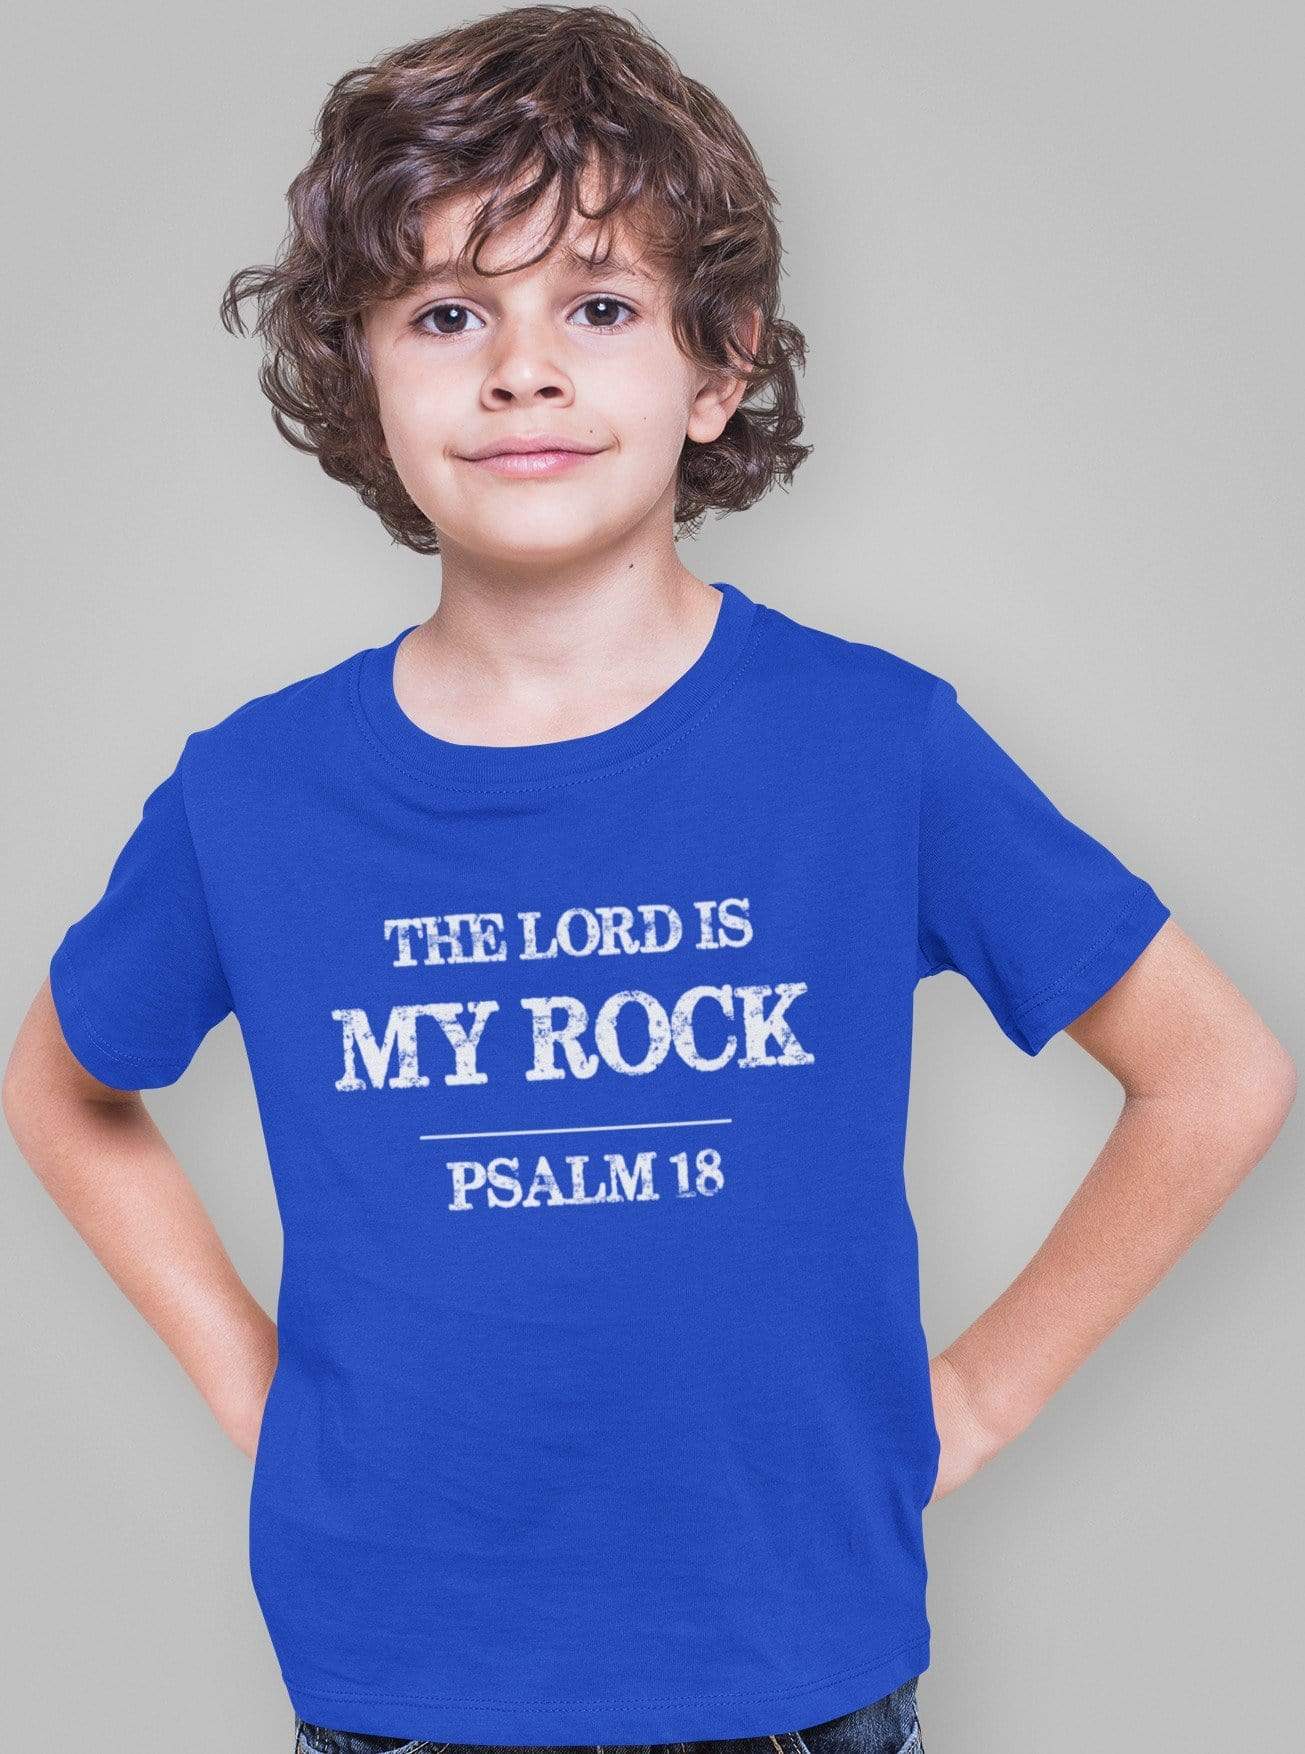 Living Words Kids Round Neck T Shirt Boy / 0-12 Mn / Royal Blue The Lord is my Rock - Psalm 18